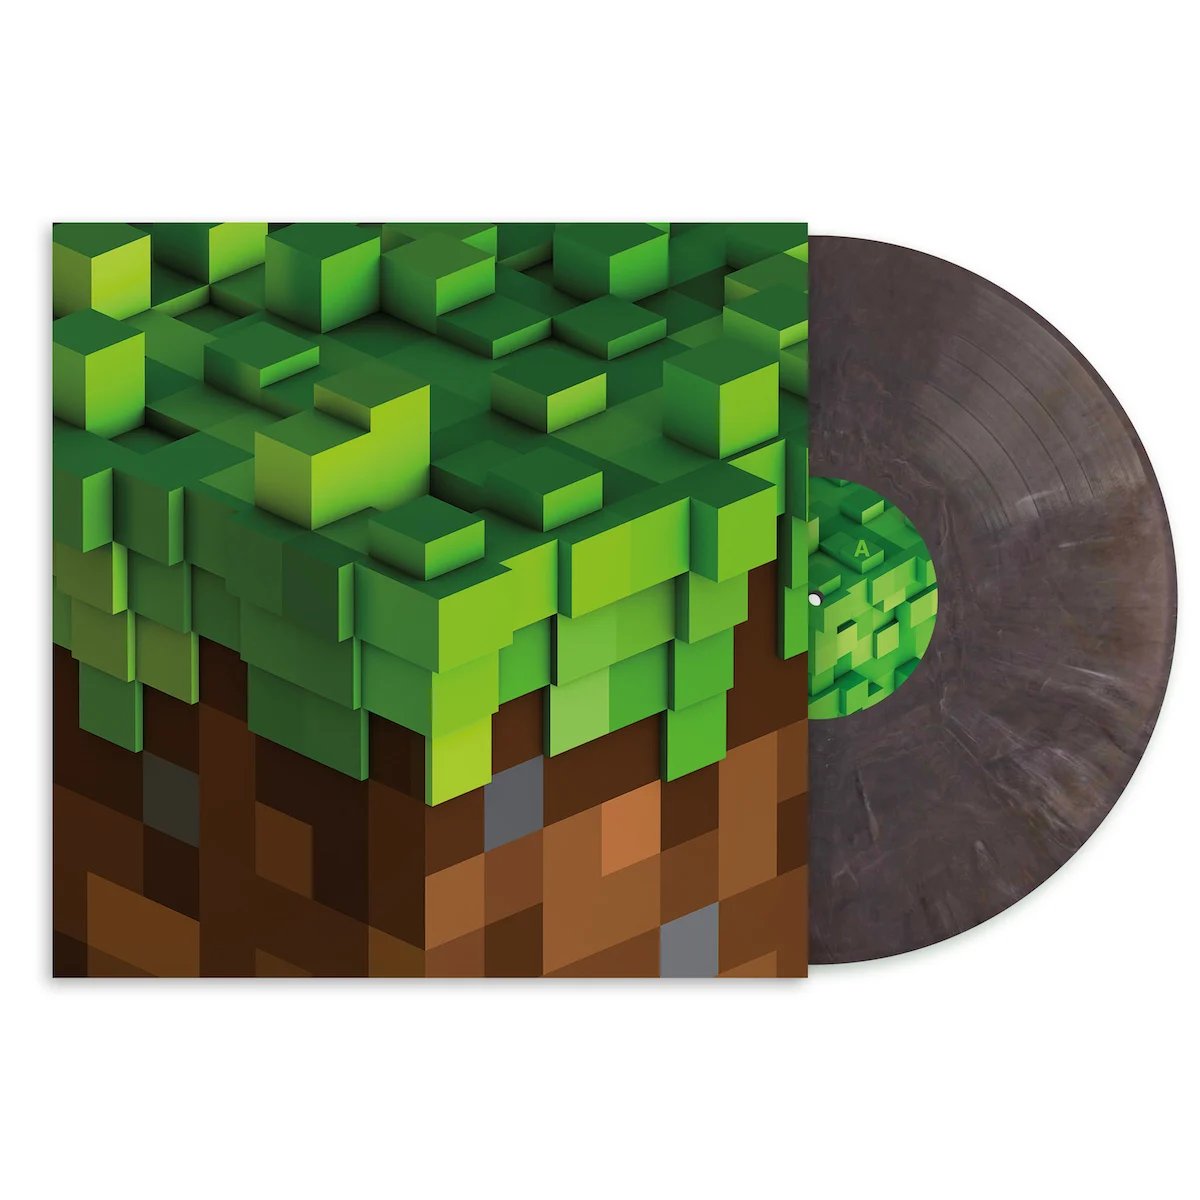 SHIPS NEXT WEEK: 'Minecraft Volume Alpha' by C418 Our limited-edition reissue of the widely acclaimed, minimalist ambient score to the popular video game is released next Friday. @C418 @ghostly normanrecords.com/records/154203…